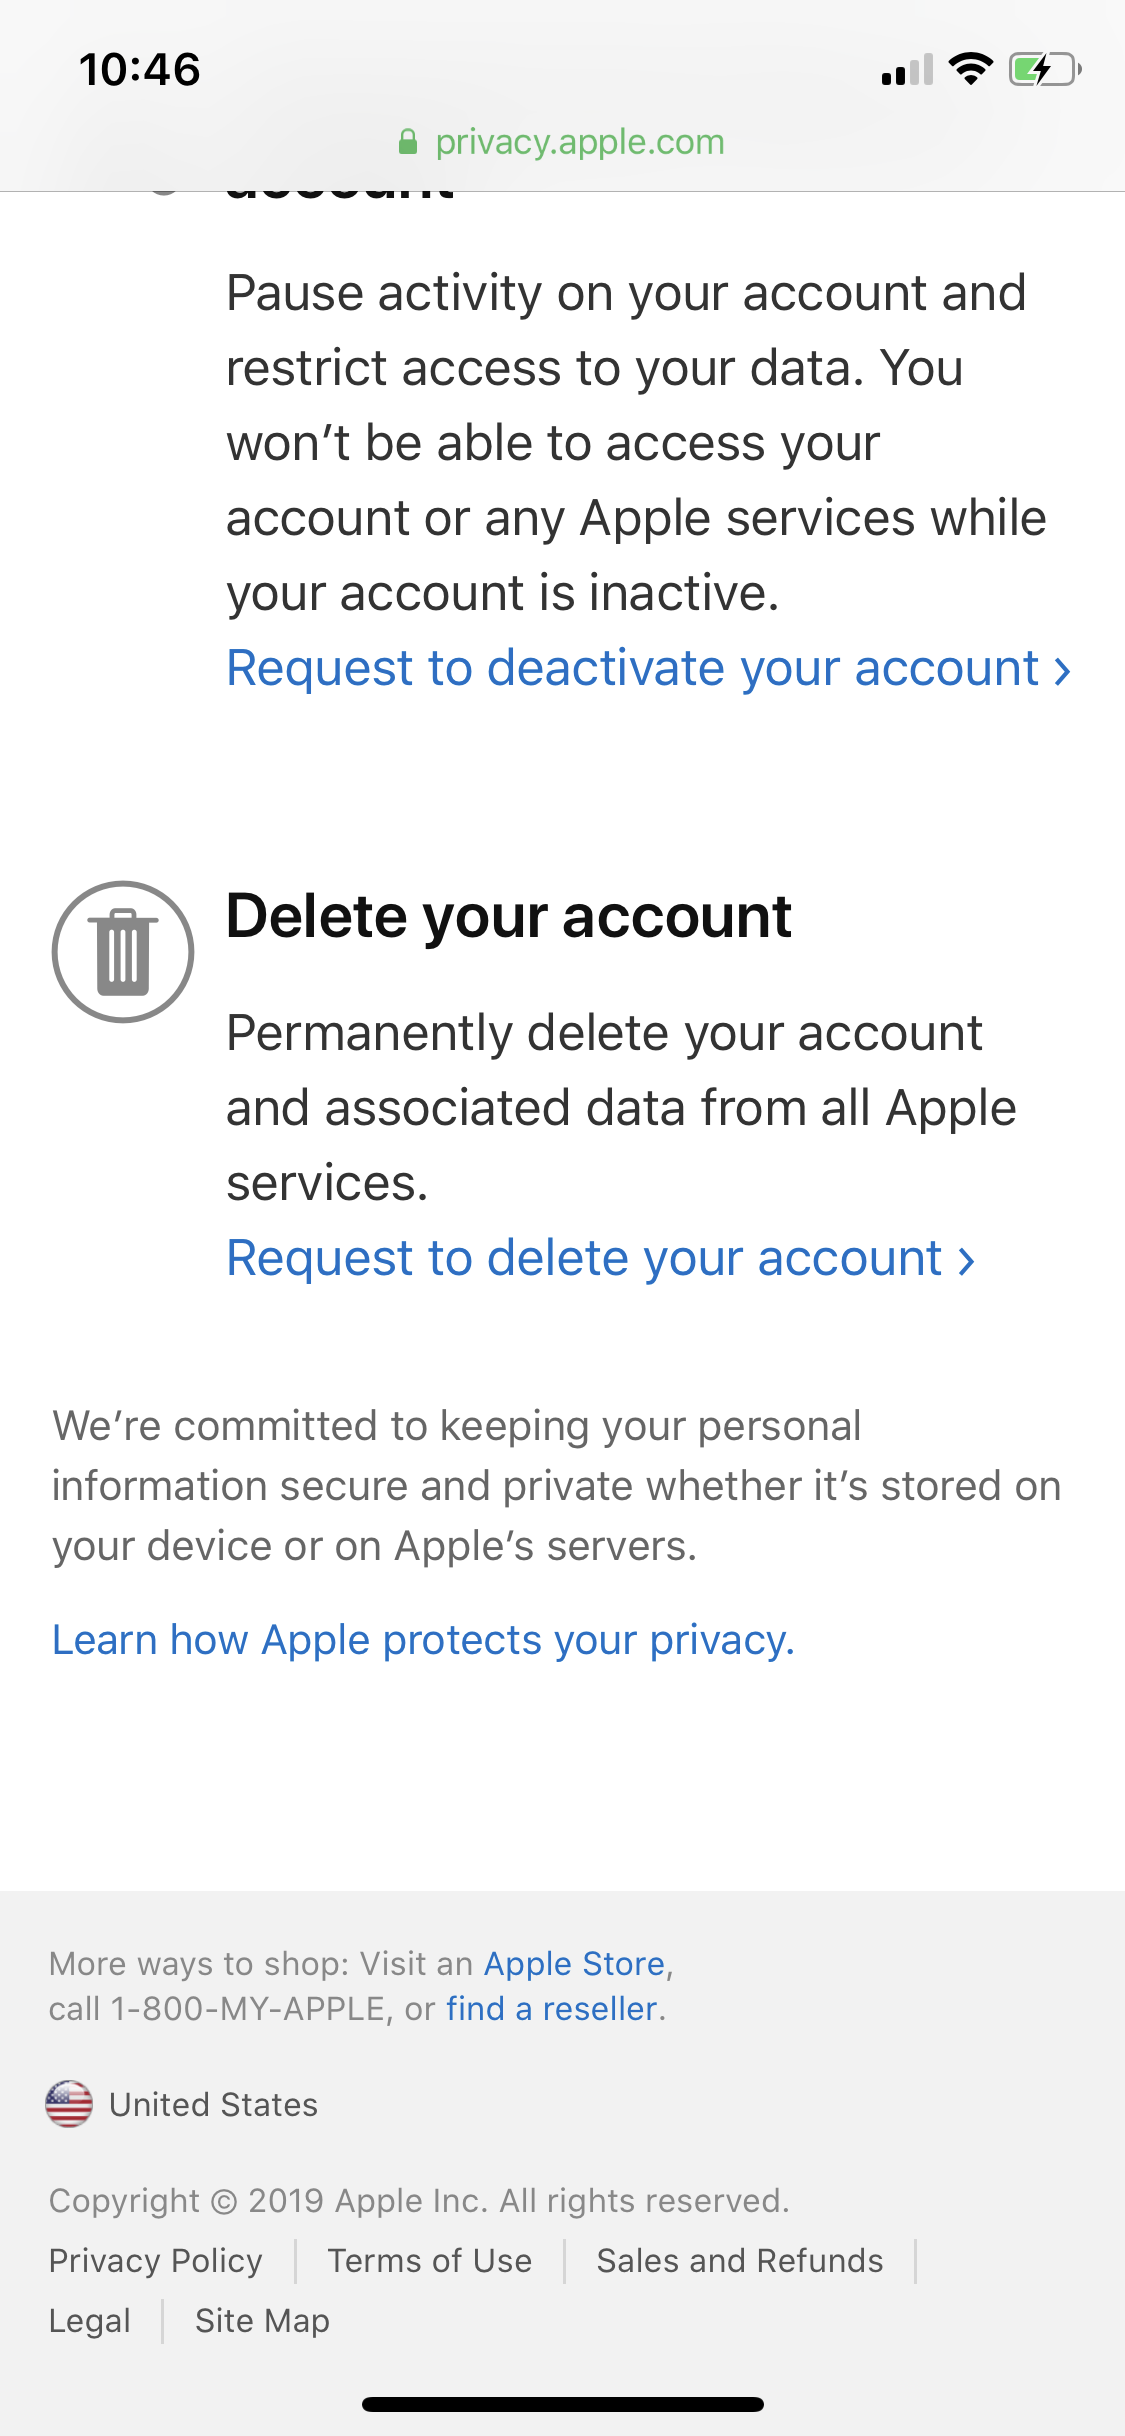 How long does it take to delete Apple ID?